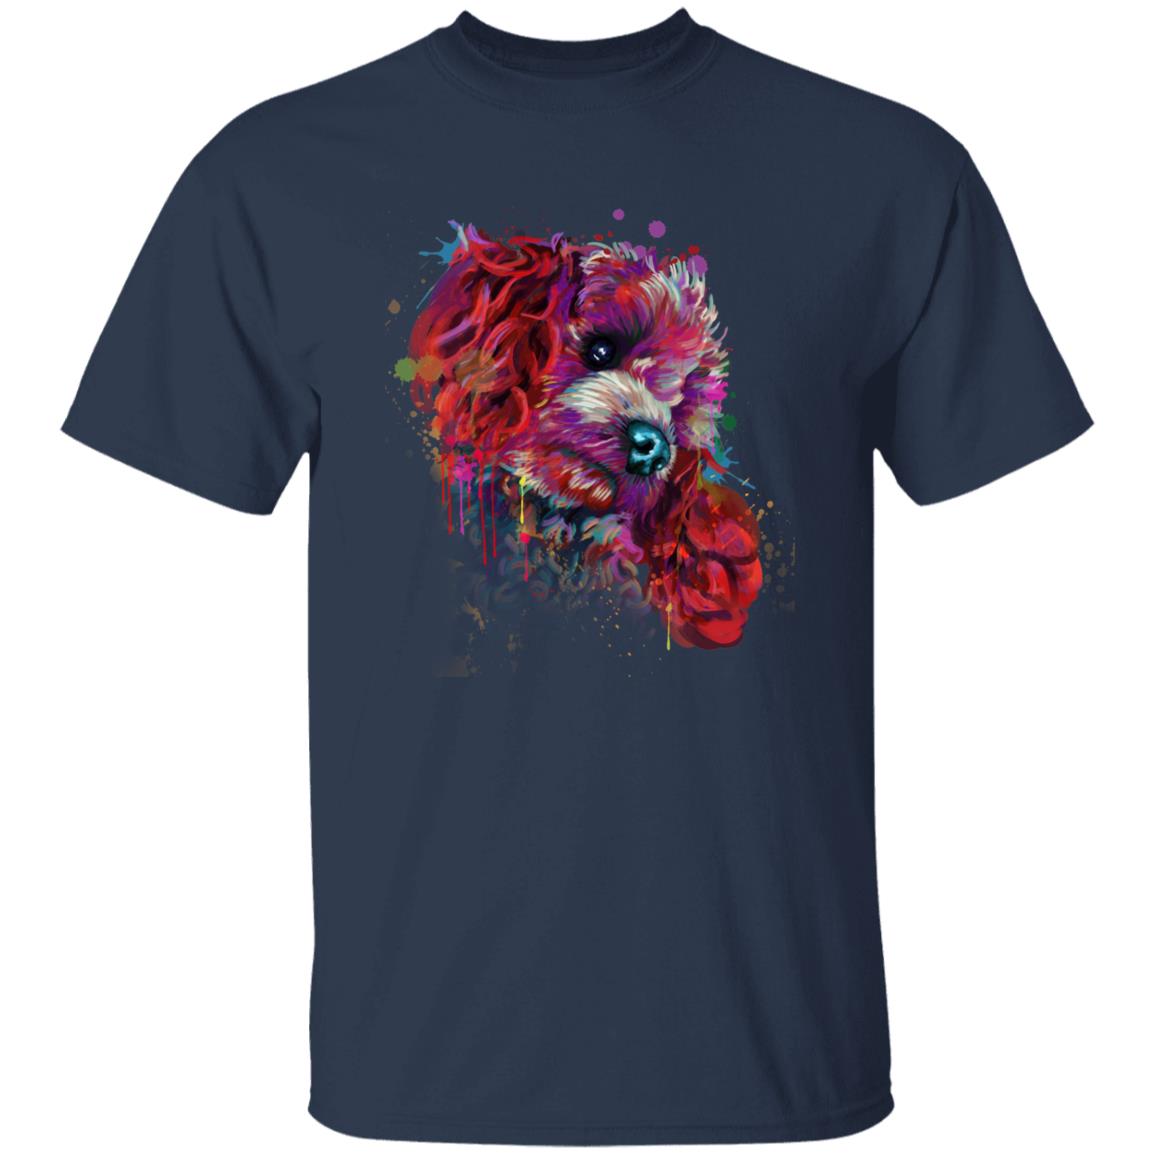 Watercolor Poodle dog Unisex shirt S-2XL black navy dark heather-Navy-Family-Gift-Planet